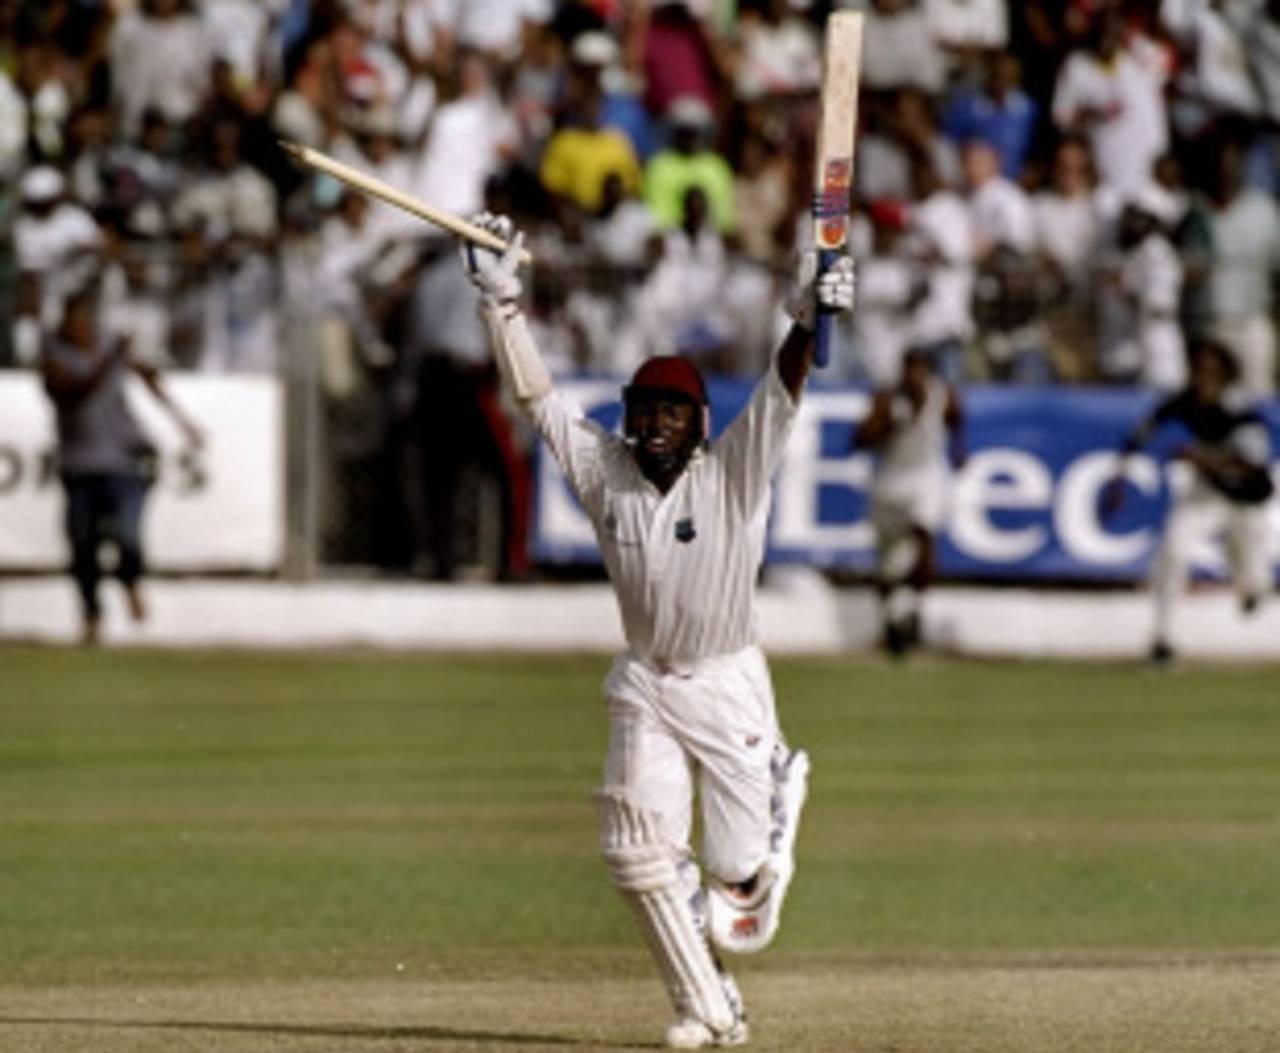 Brian Lara celebrates the victory after scoring an unbeaten 153, West Indies v Australia, 3rd Test, Barbados, 5th day, March 30, 1999